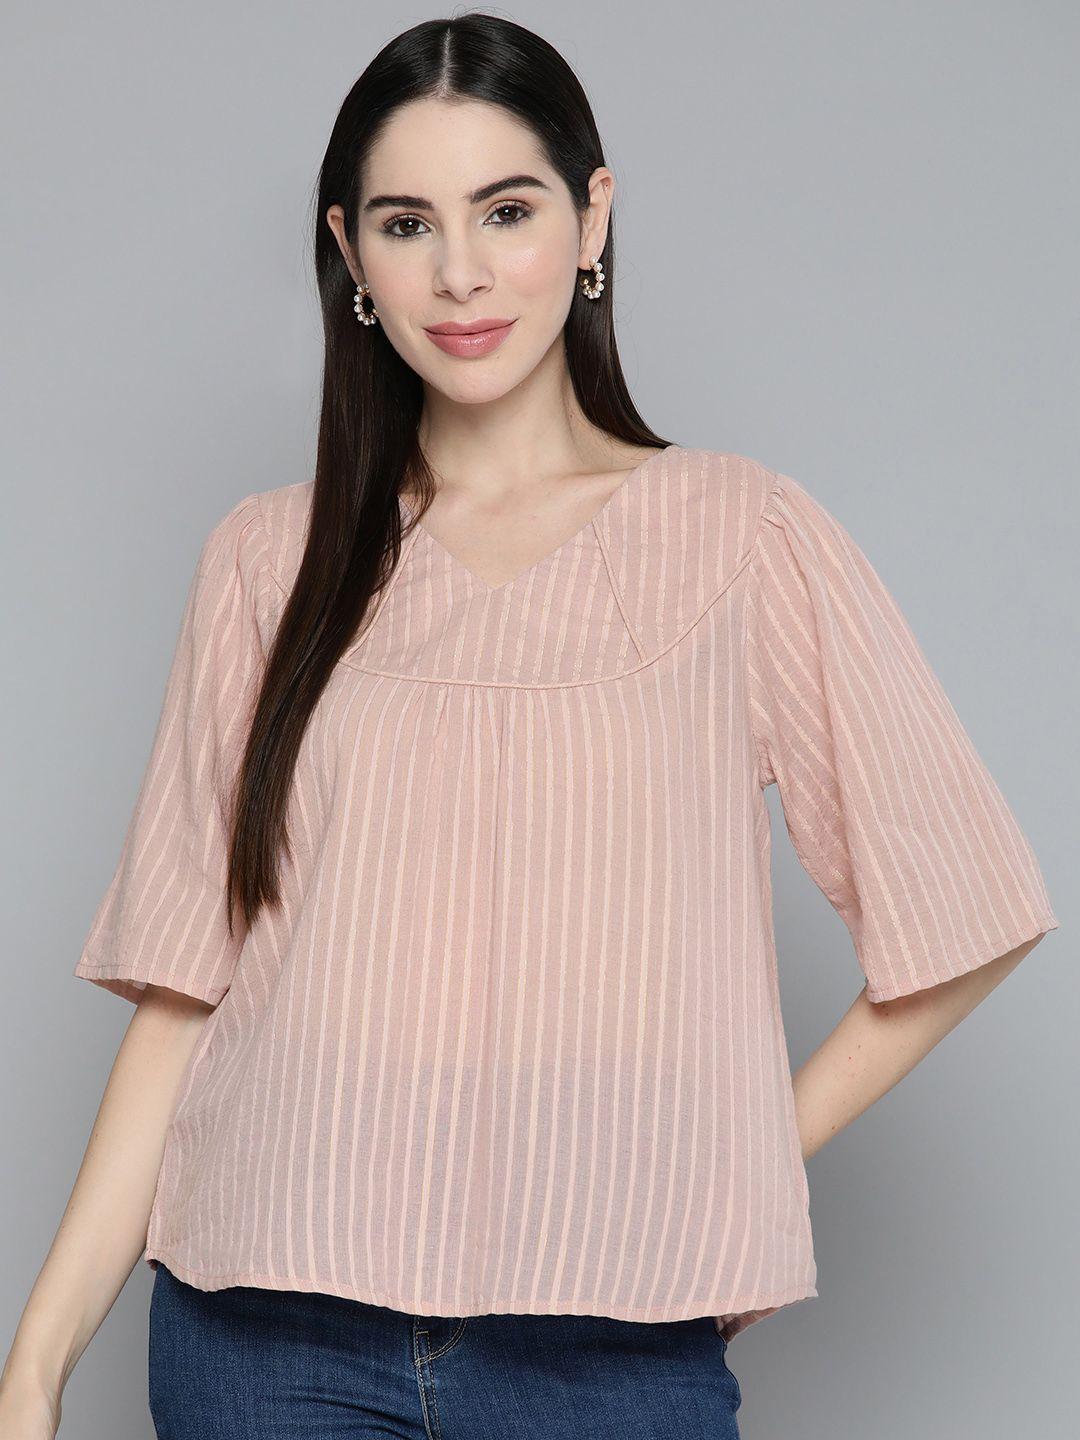 scoup striped flared sleeves top